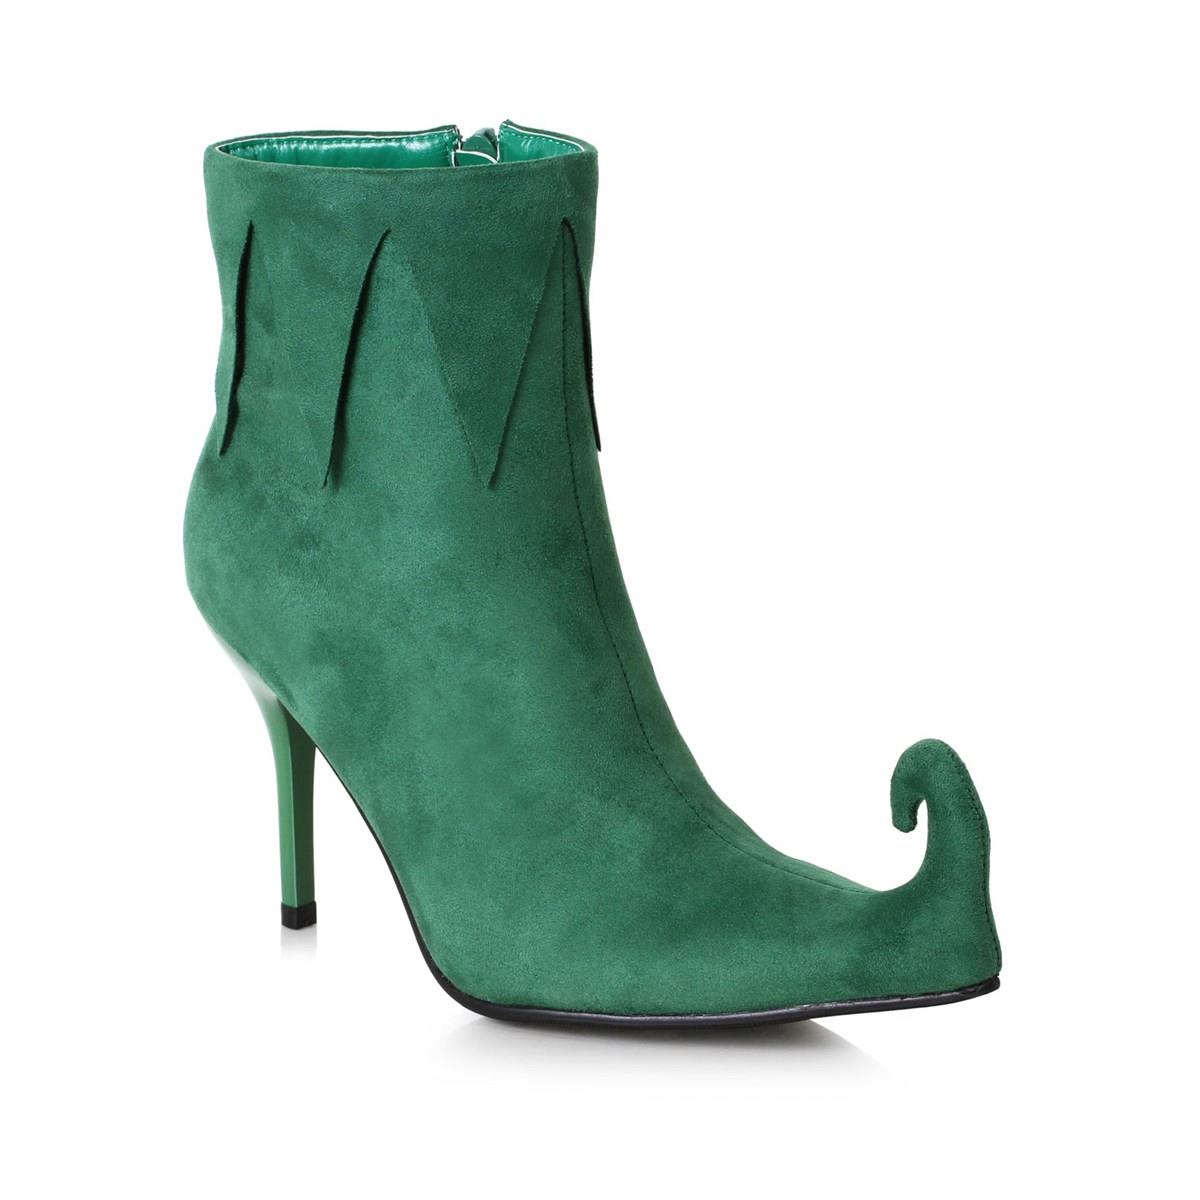 276411 3 in. Womens Heel Holiday Boot, Green - Size 8